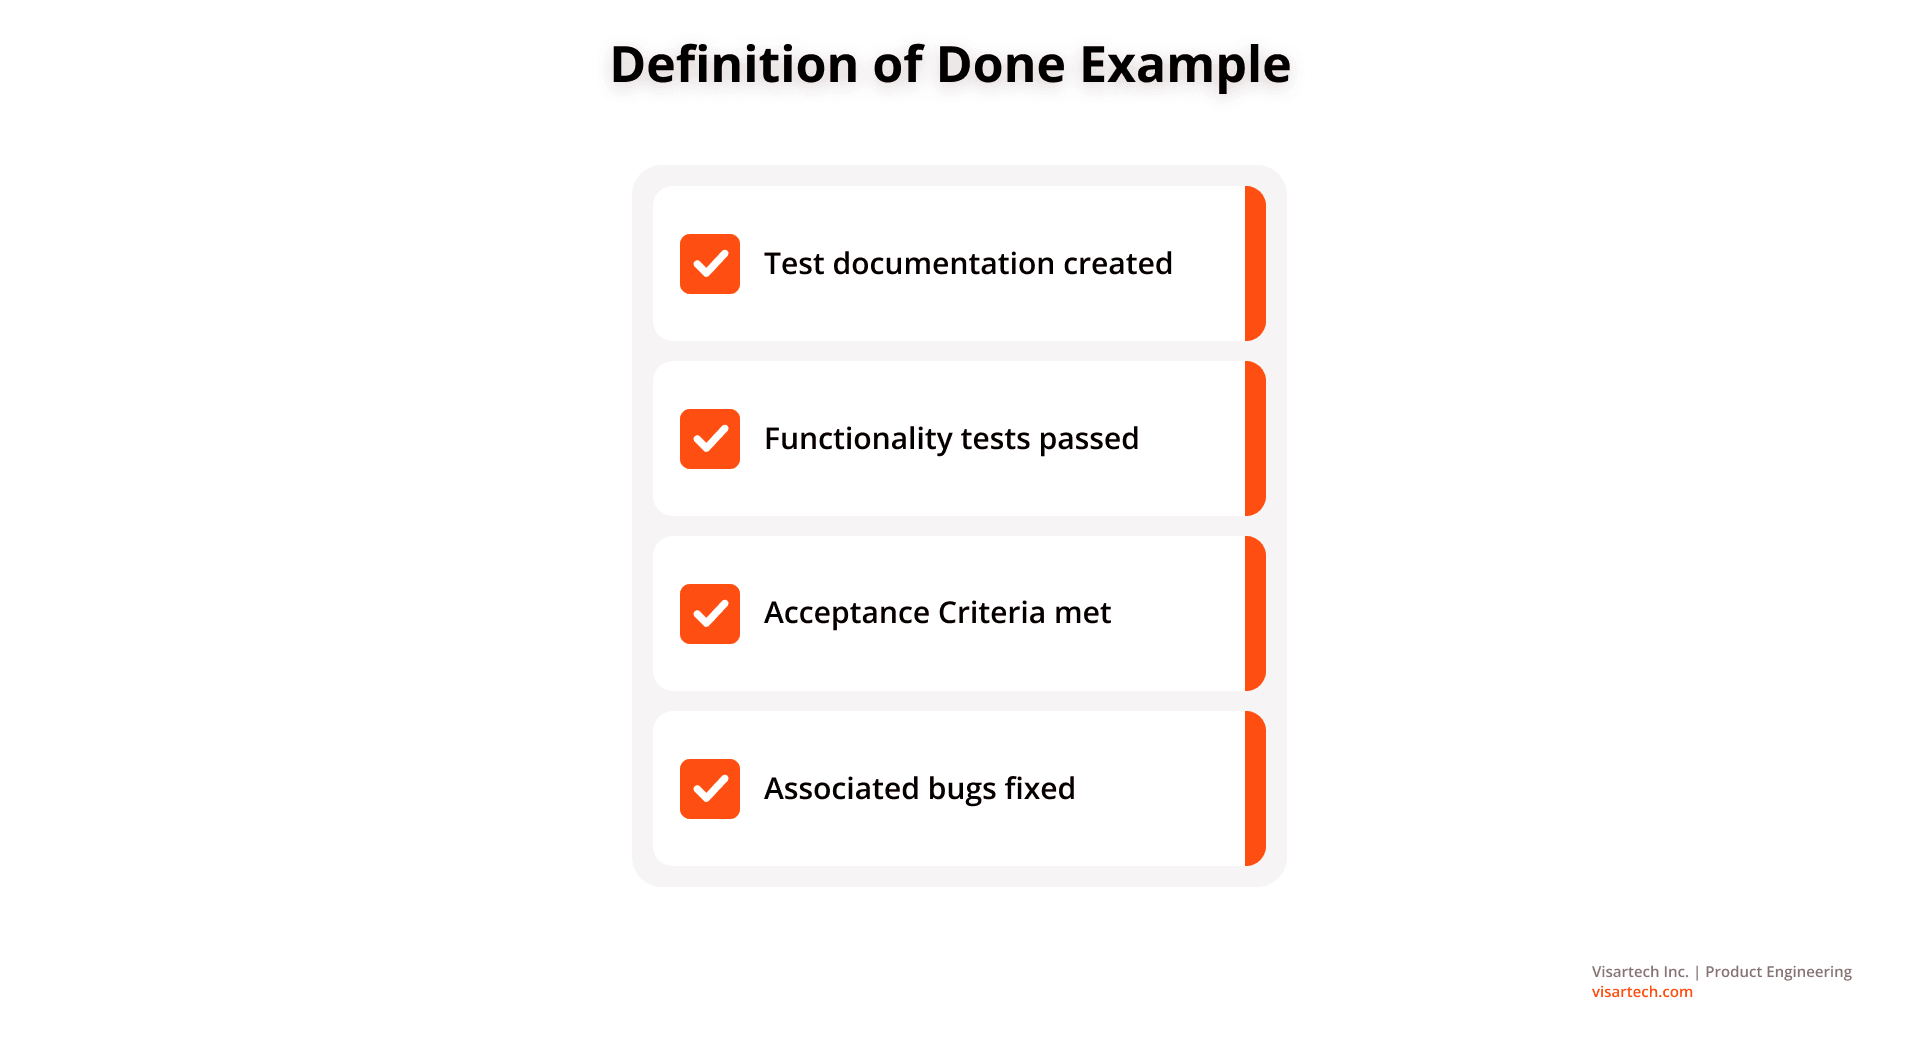 Definition of Done Example - Visartech Blog